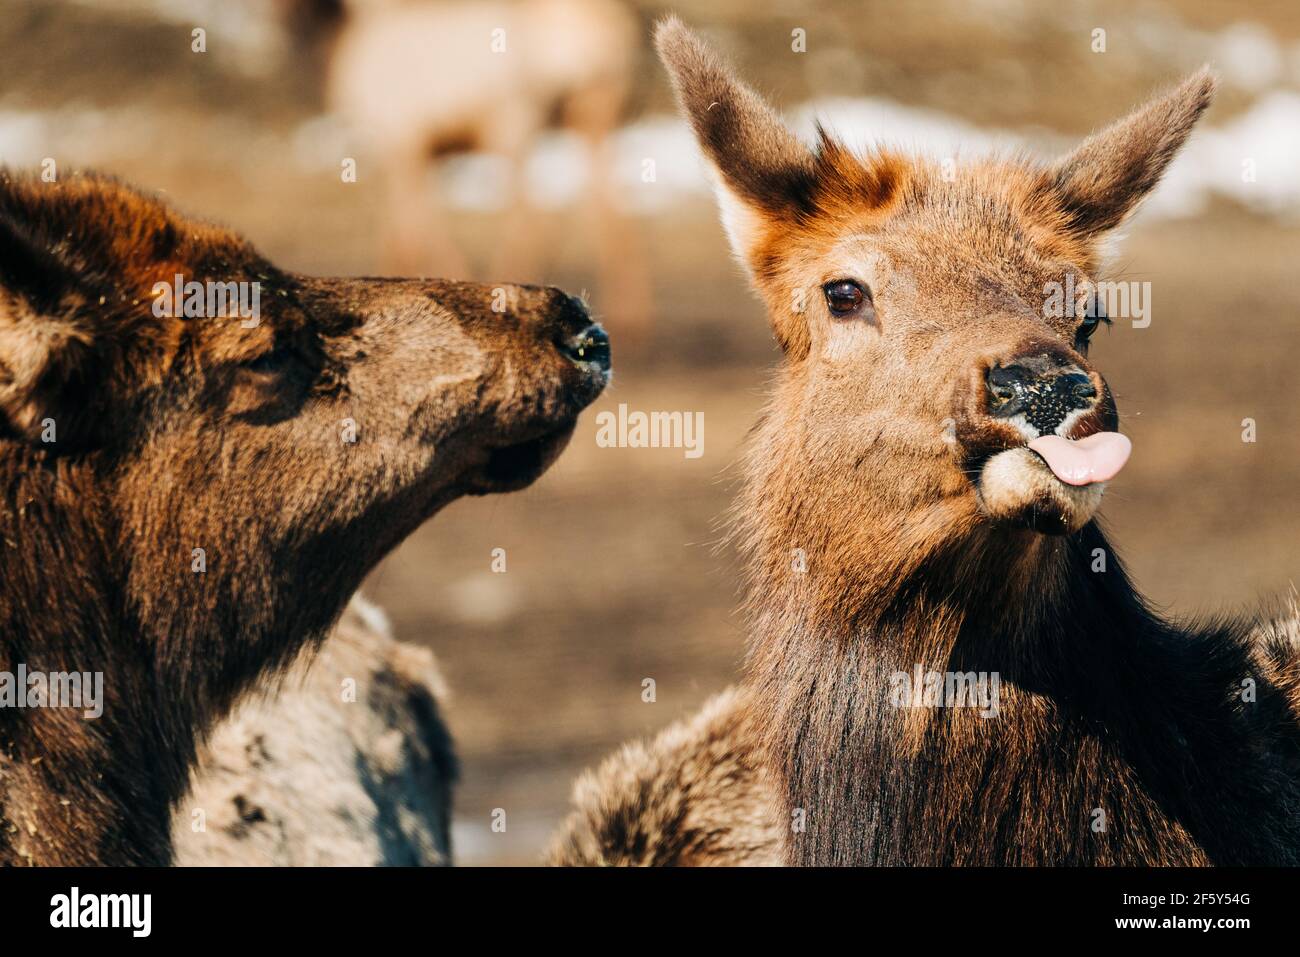 Closeup of an elk with its tongue sticking out Stock Photo